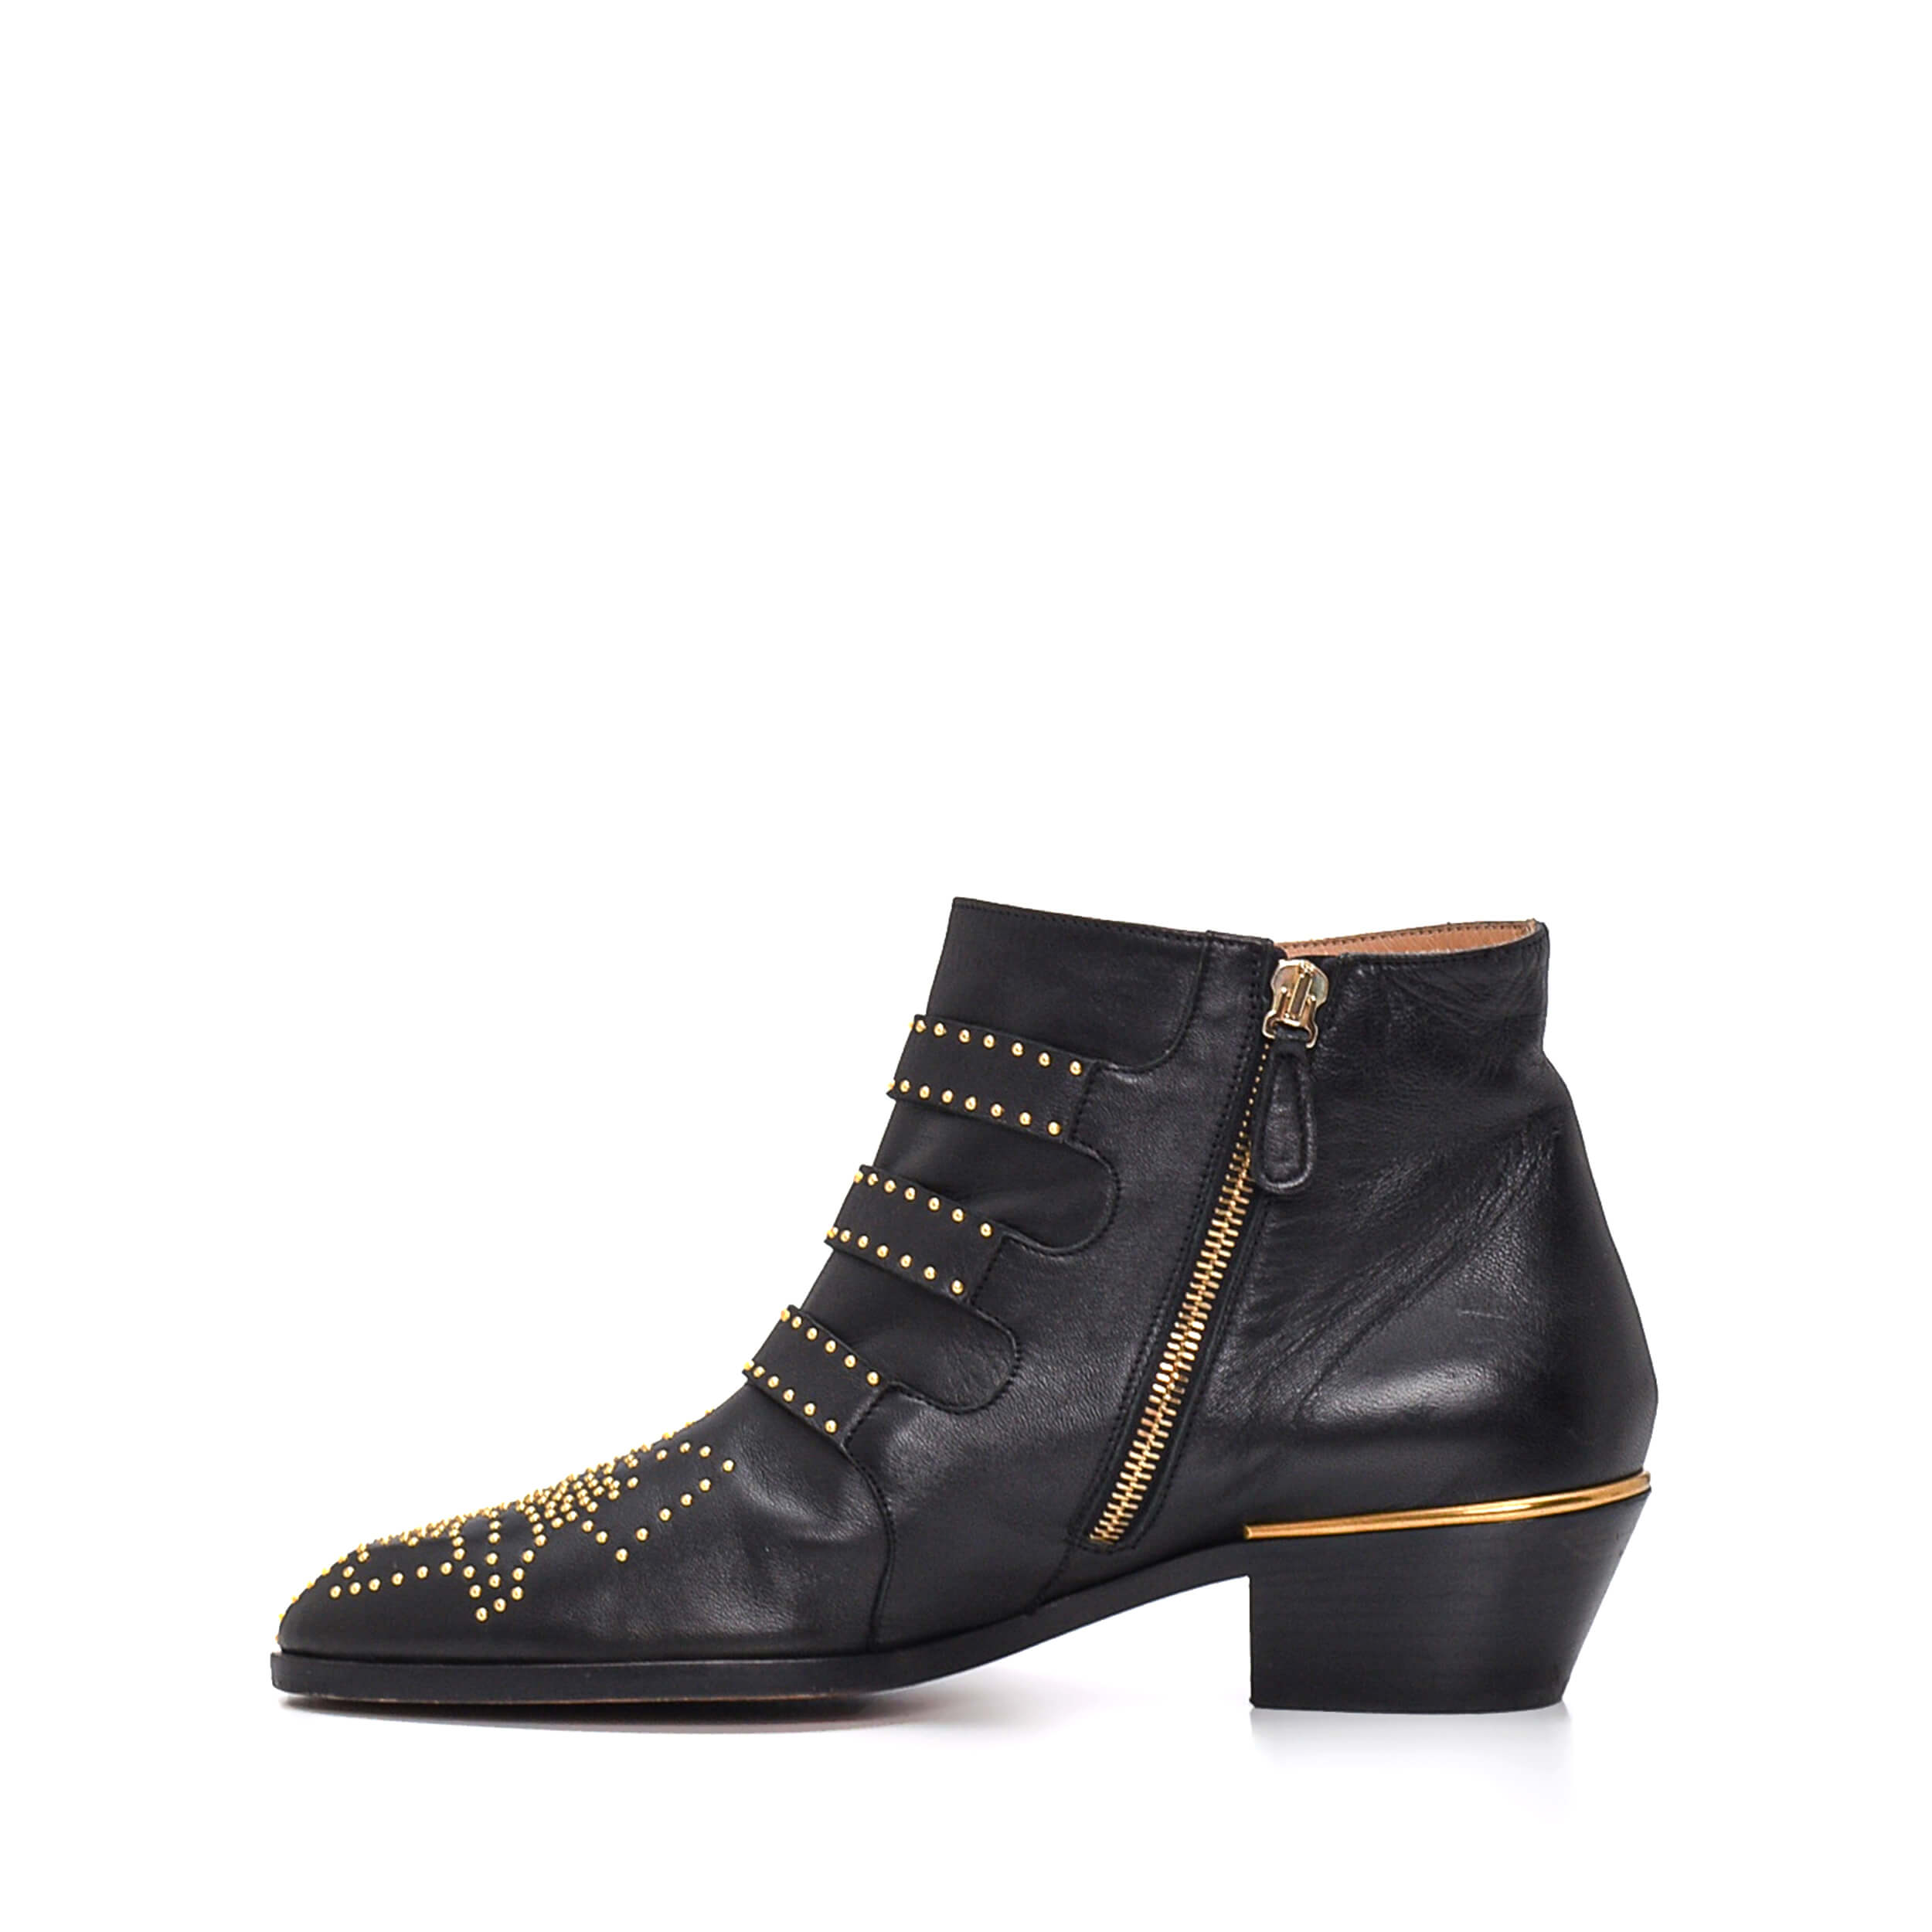 Chloe - Black Smooth Nappa Leather Strapped & Studded Susanna Boots II